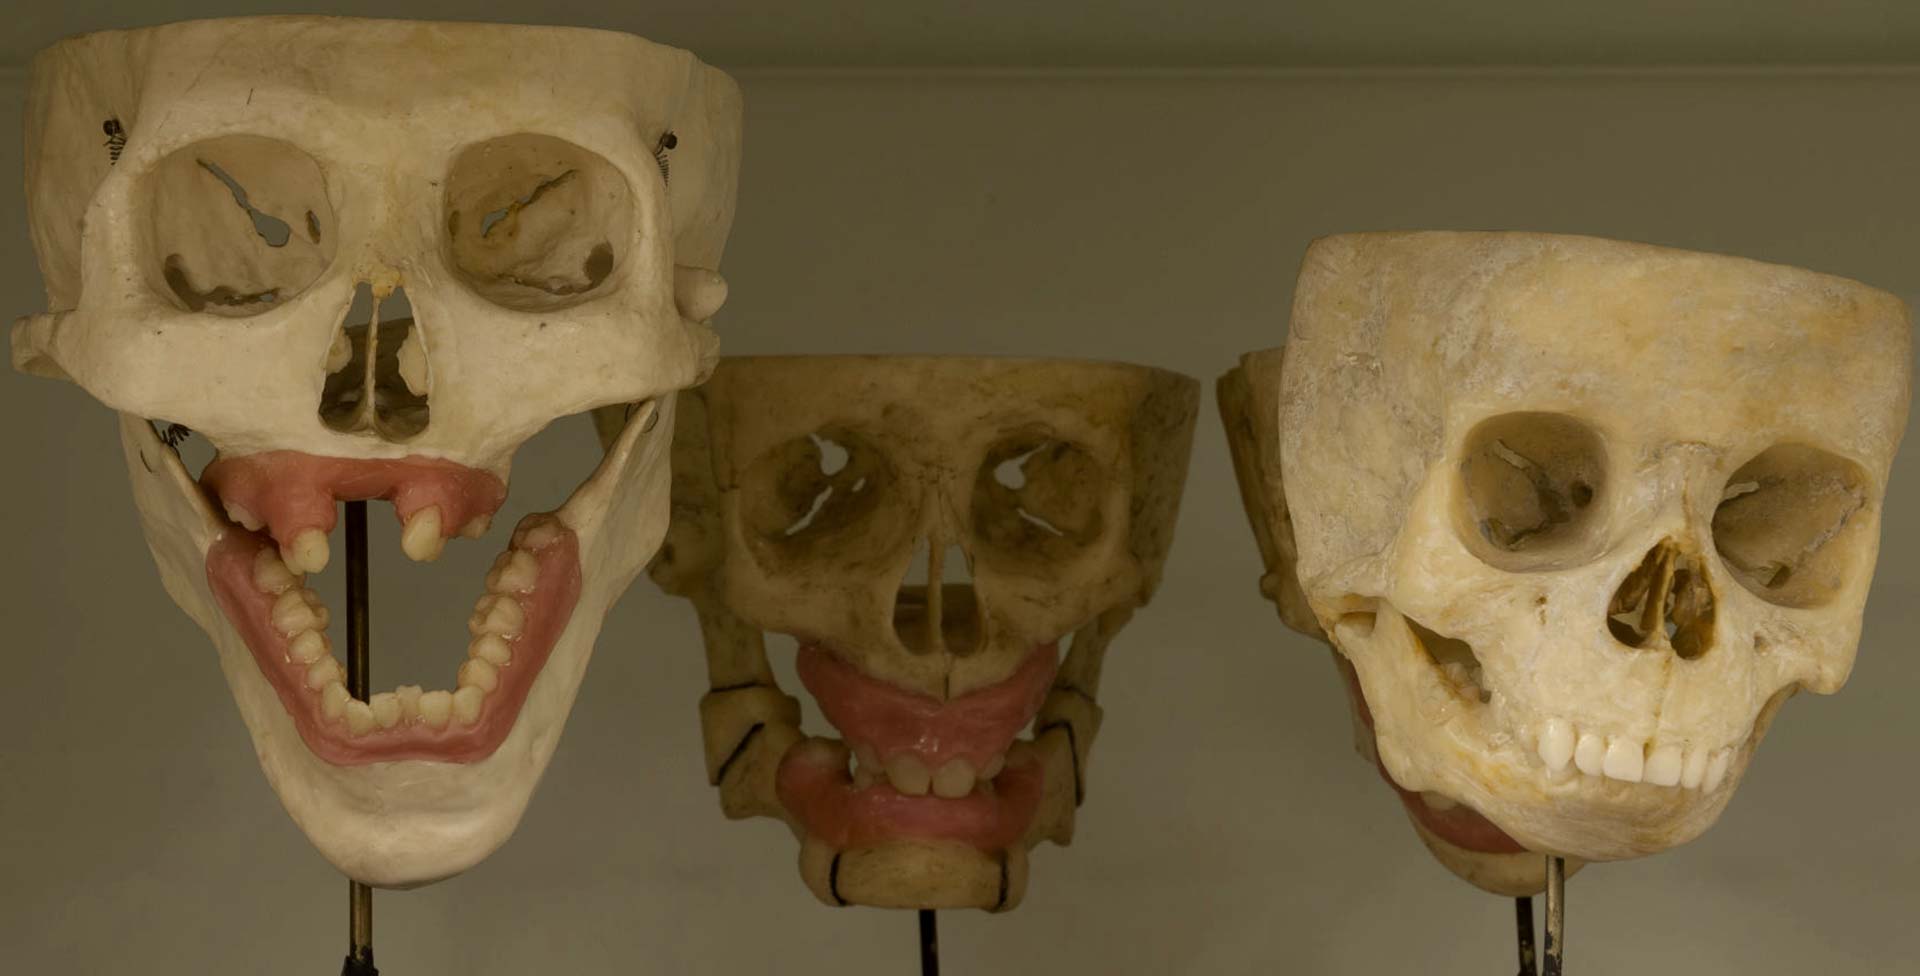 Skulls from the dentistry collection at Blythe House